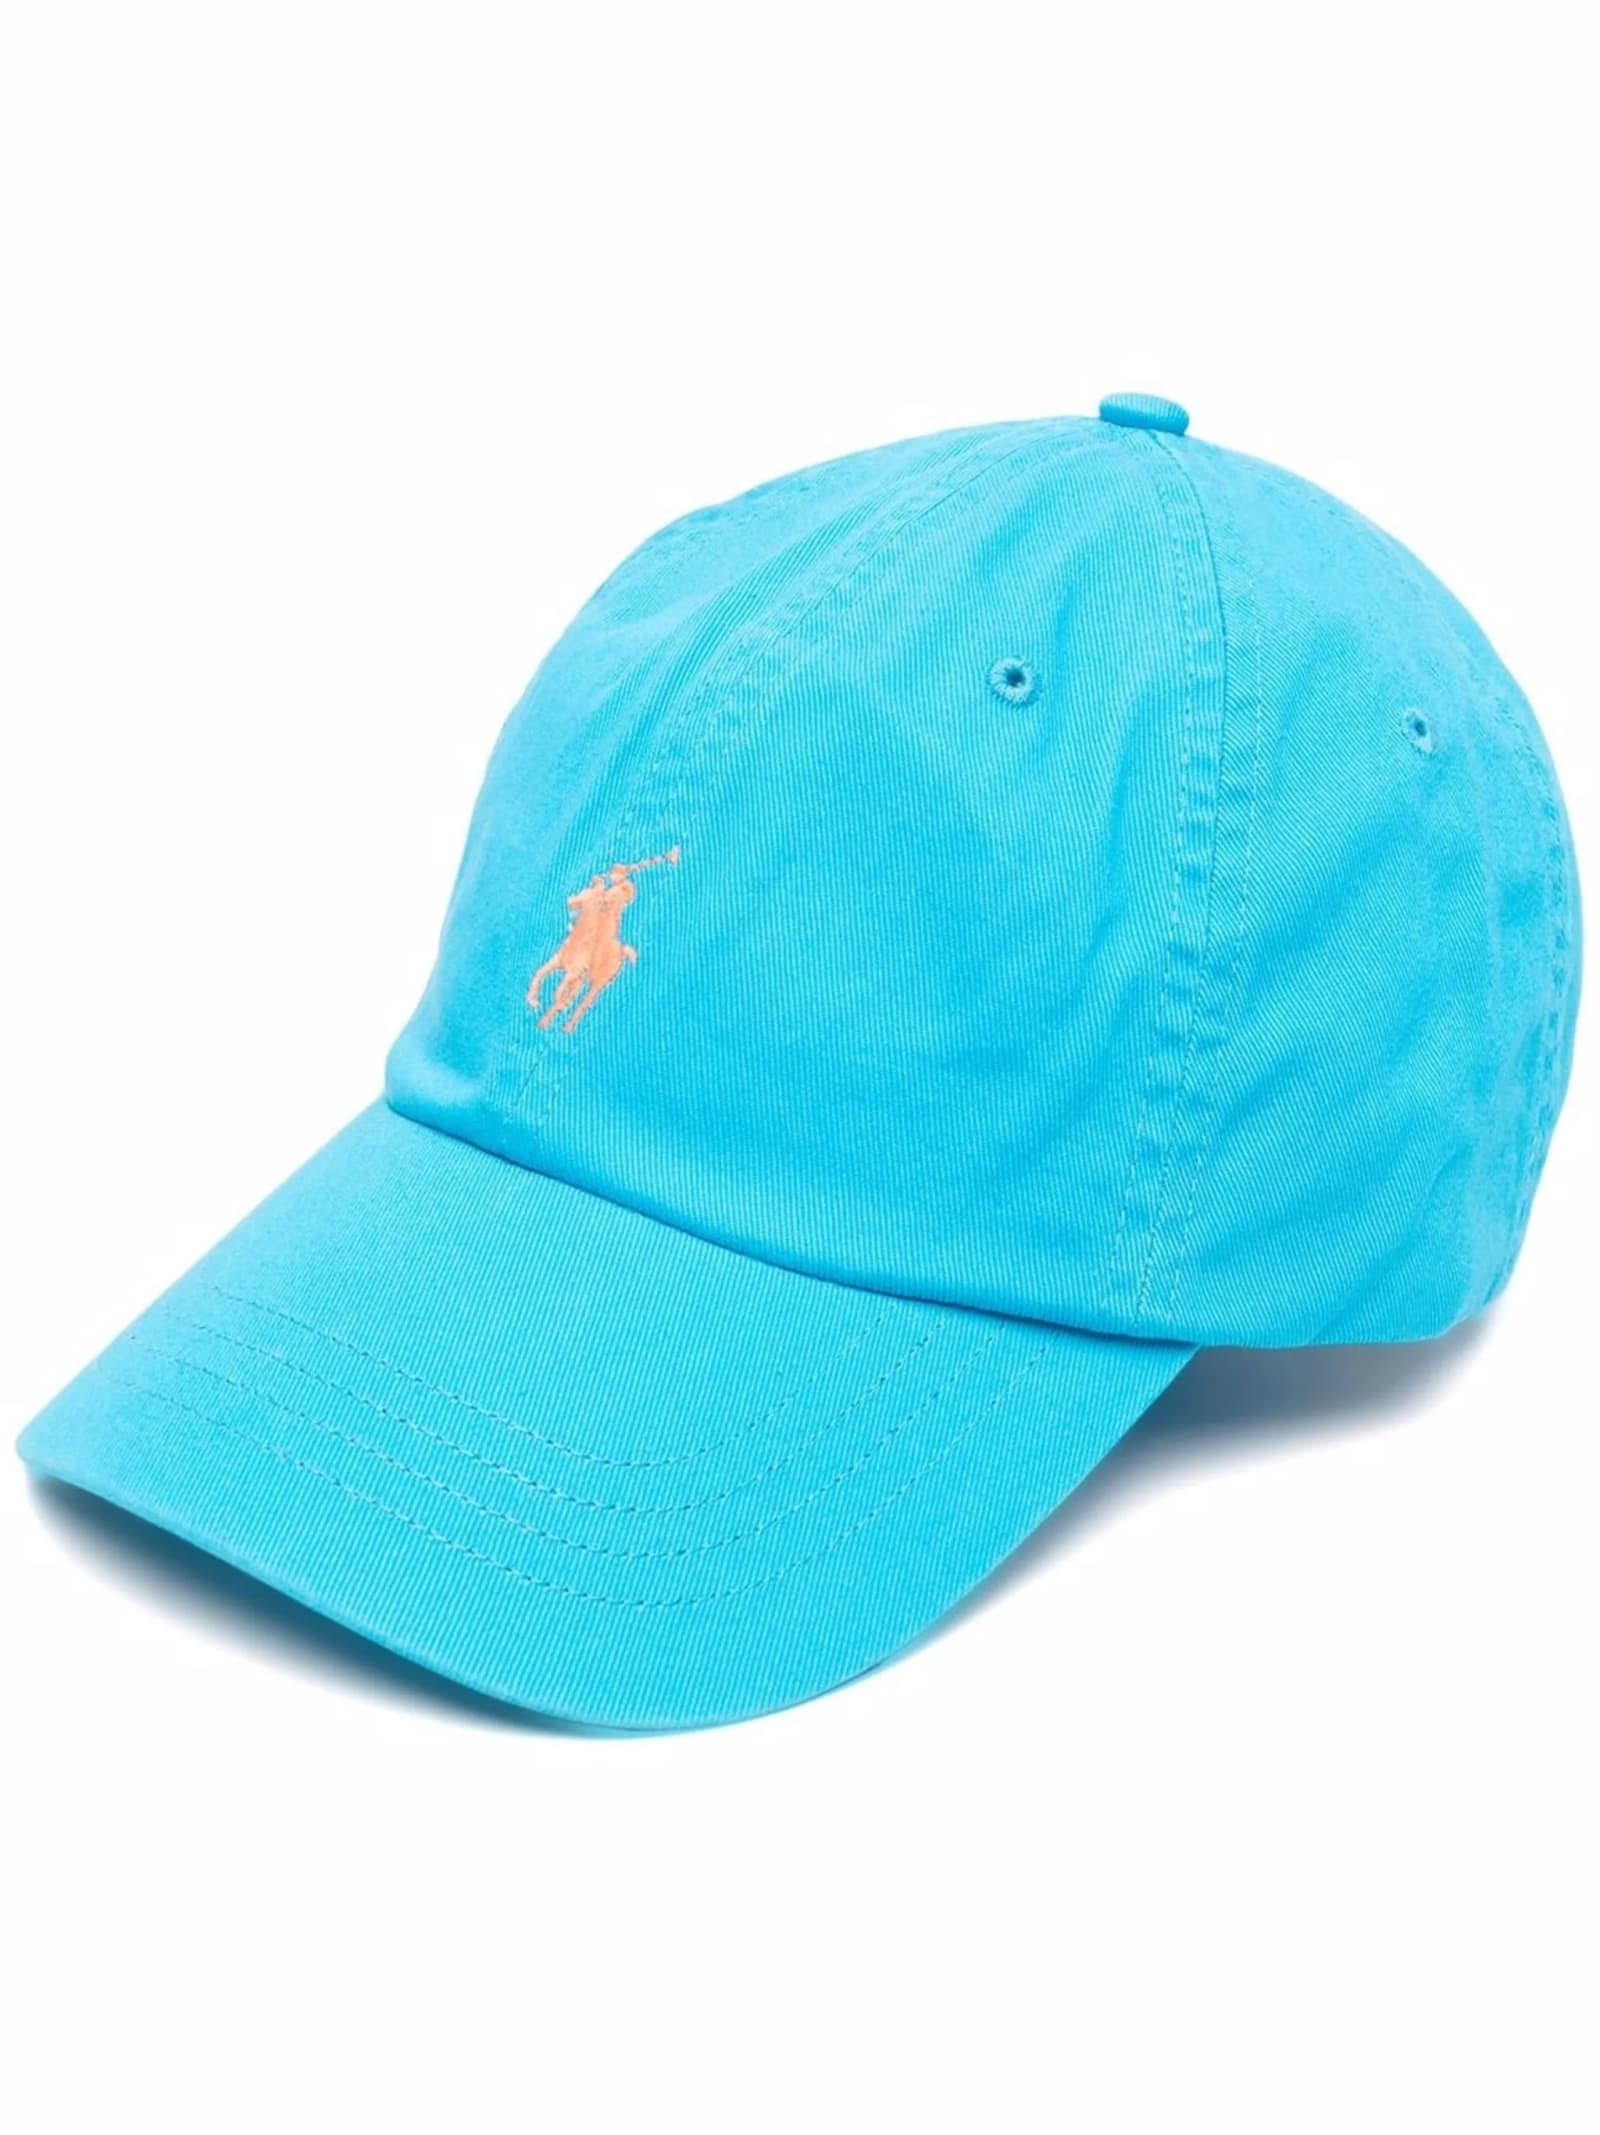 POLO RALPH LAUREN LIGHT BLUE BASEBALL HAT WITH CONTRASTING PONY